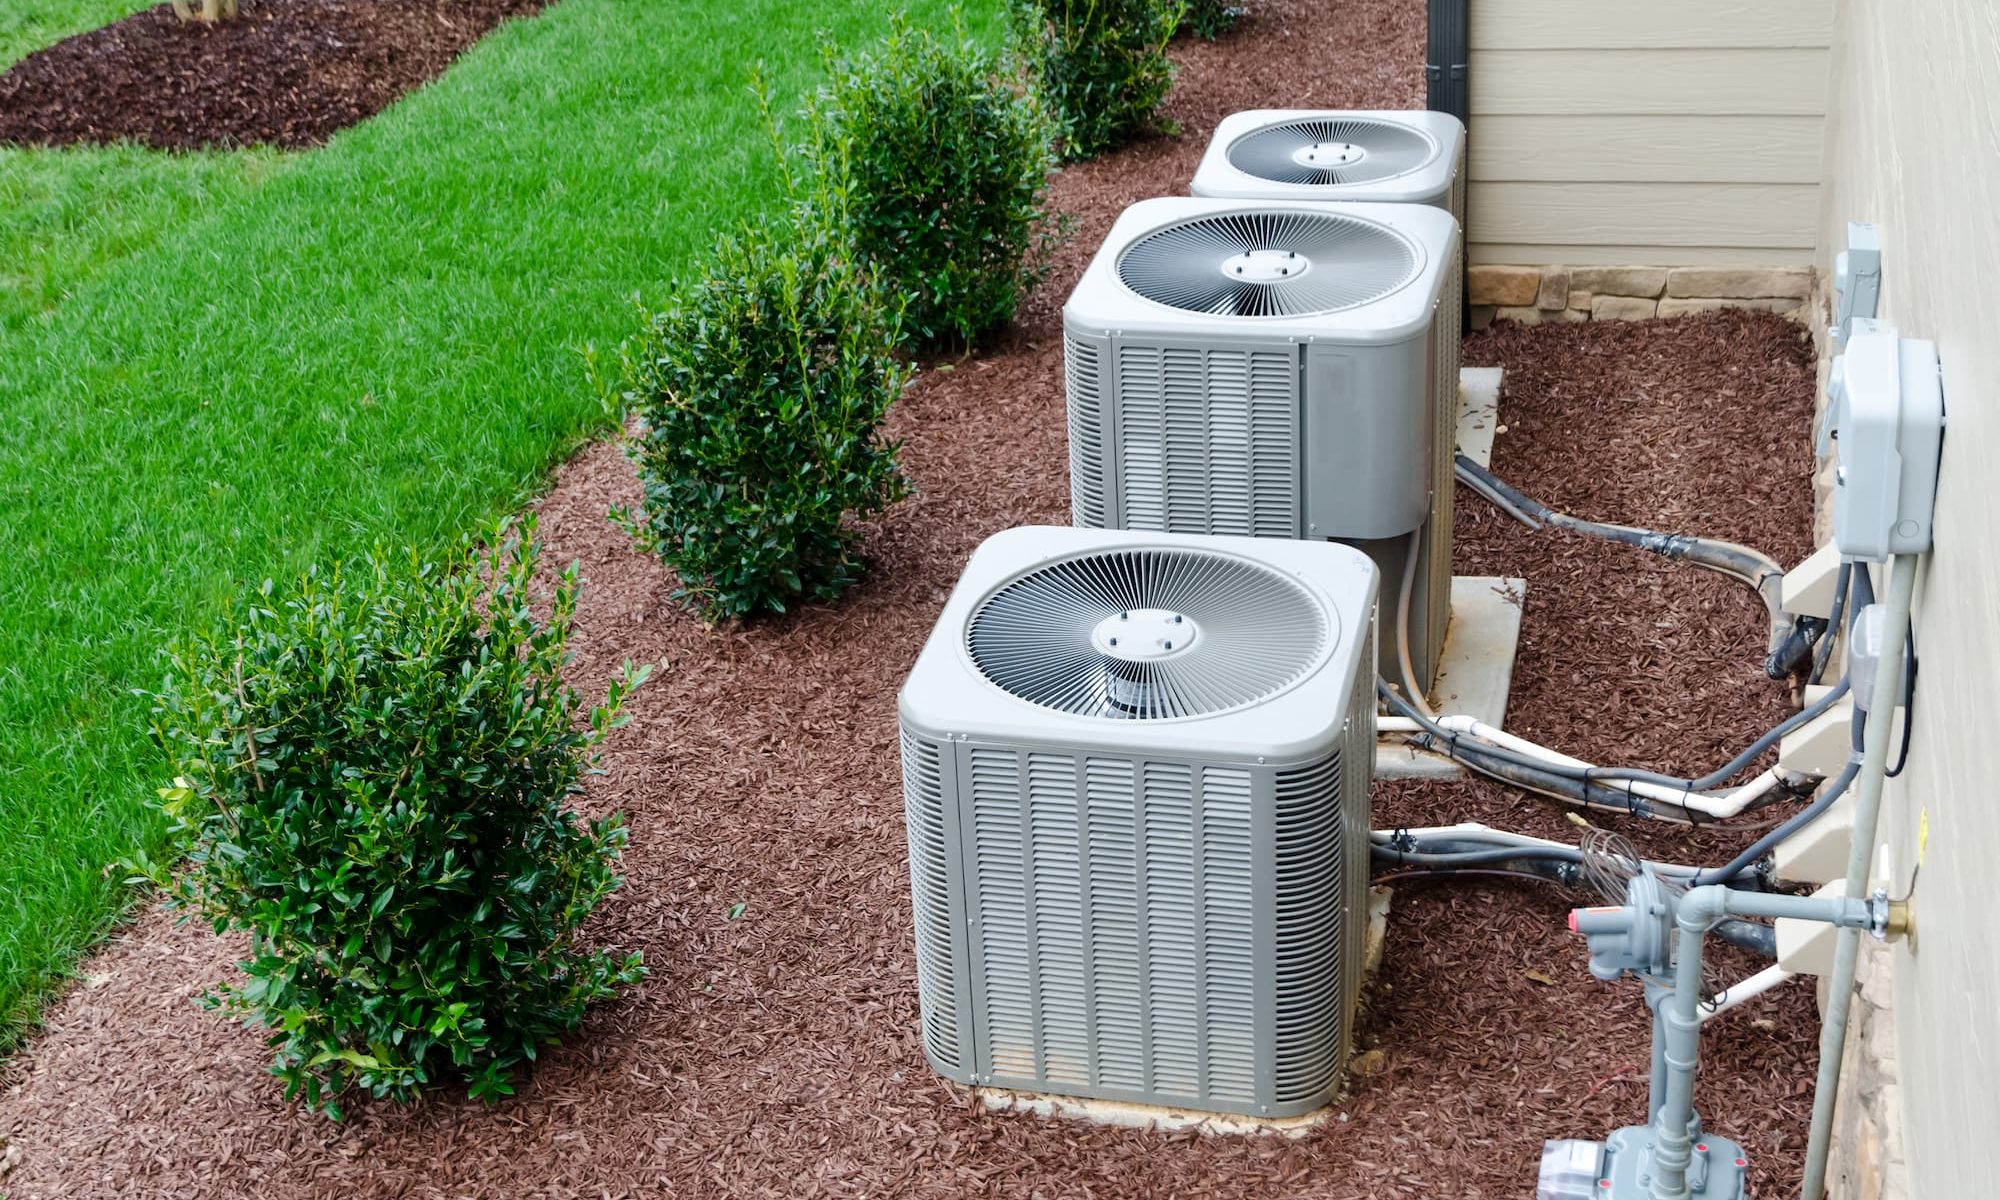 Superstition cooling chooses an air conditioner brand